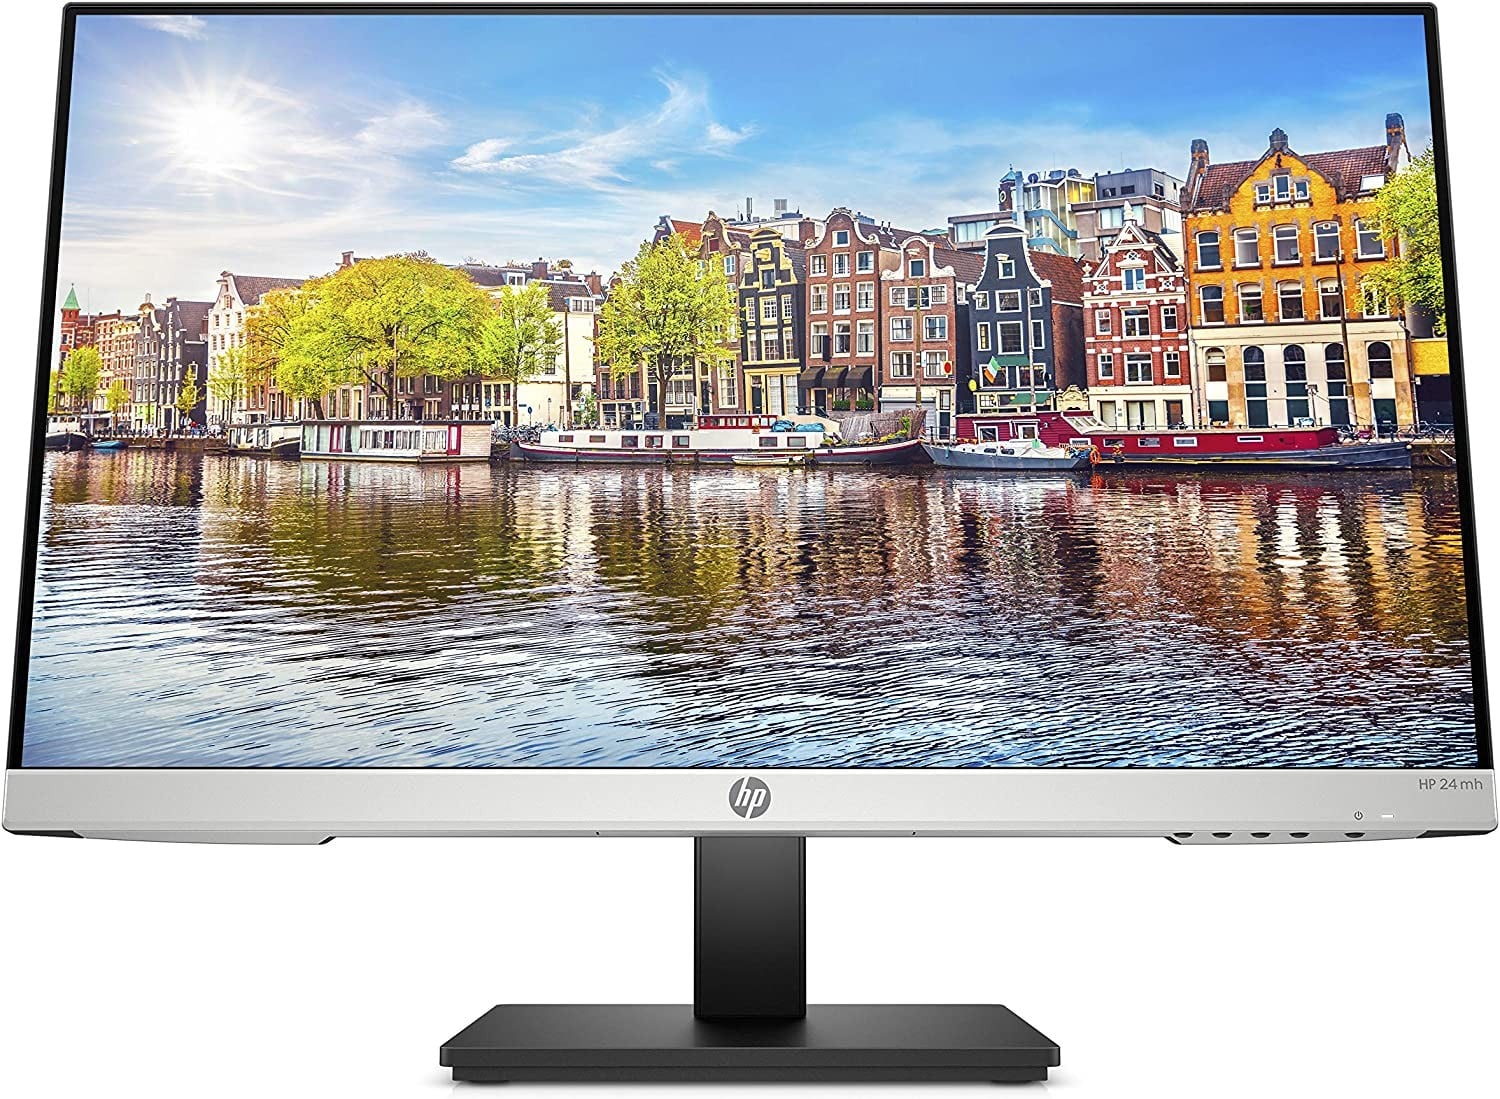 HP 24mh FHD Monitor - Computer Monitor with 23.8-Inch IPS Display 